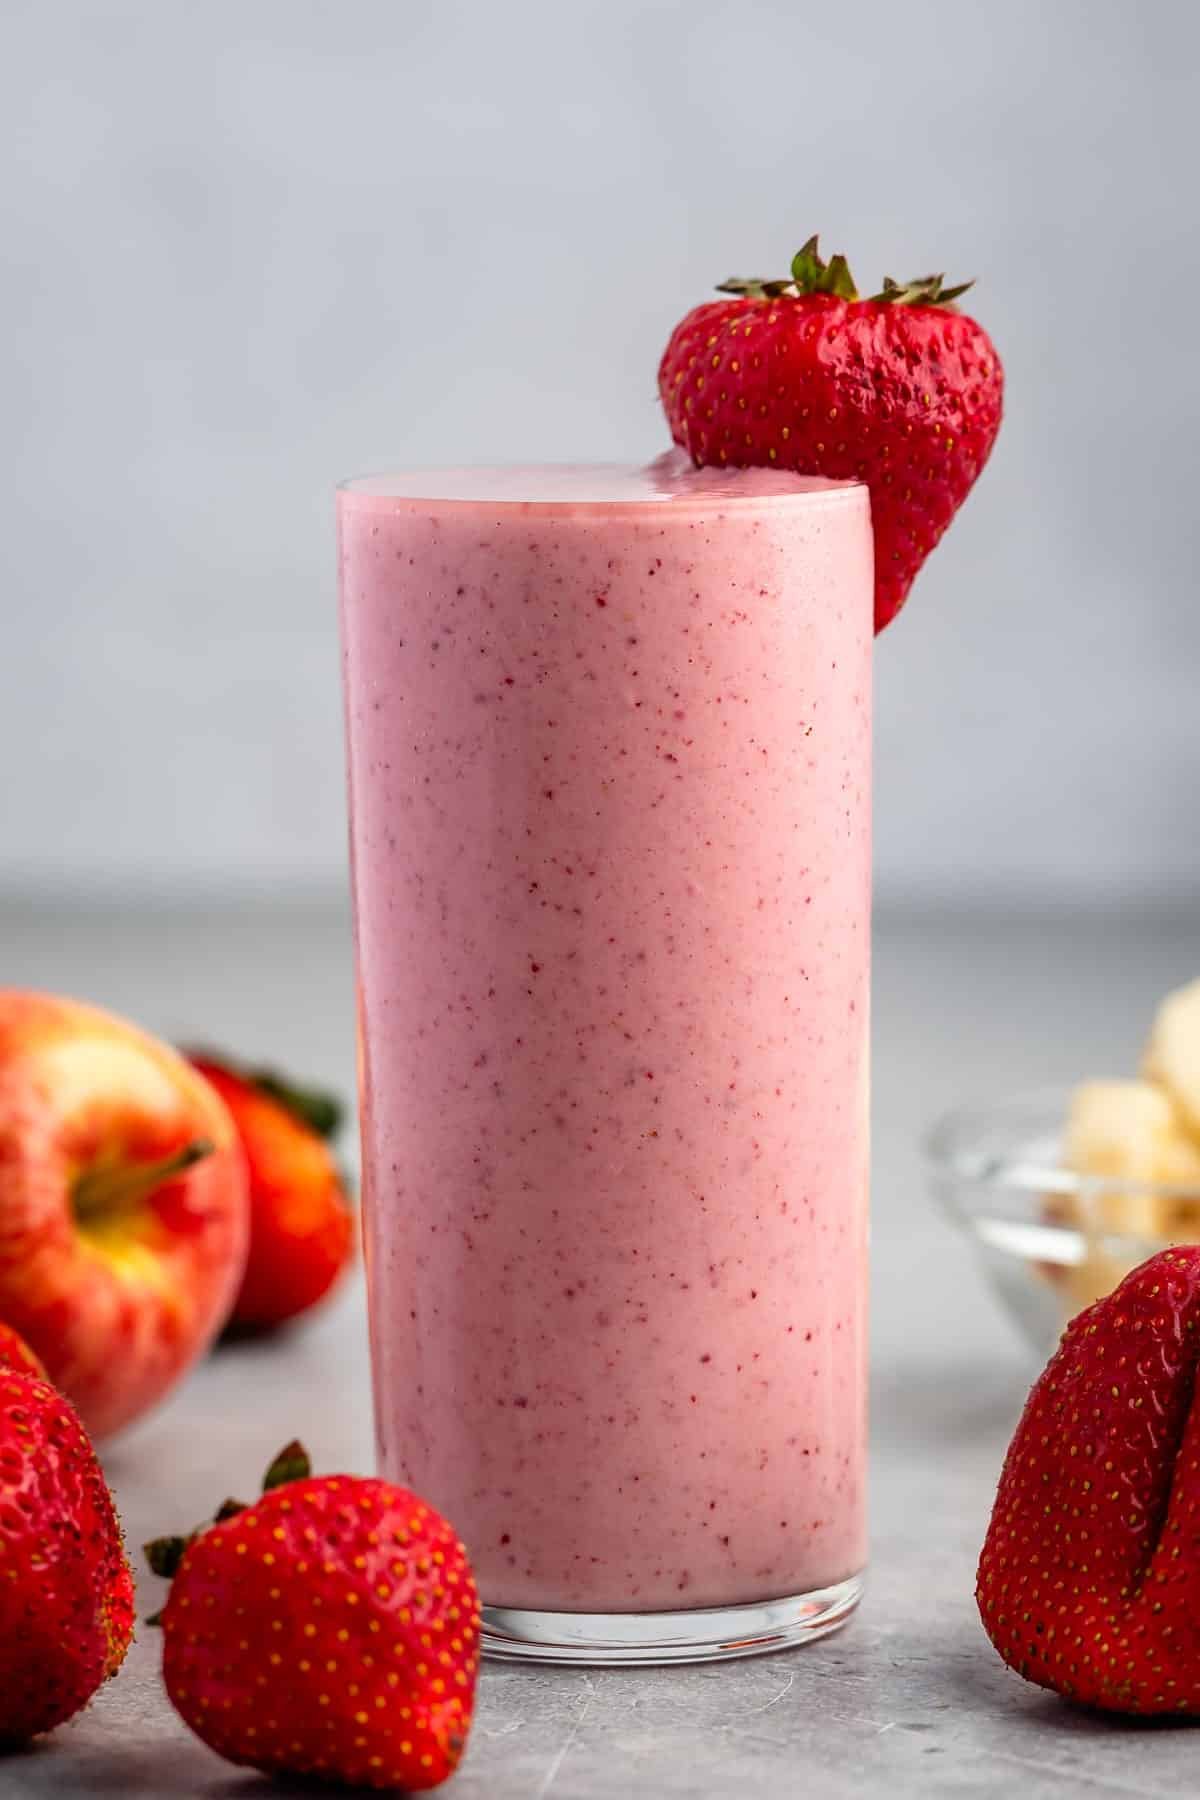 tall clear glass holding light pink smoothie with a strawberry on the rim.